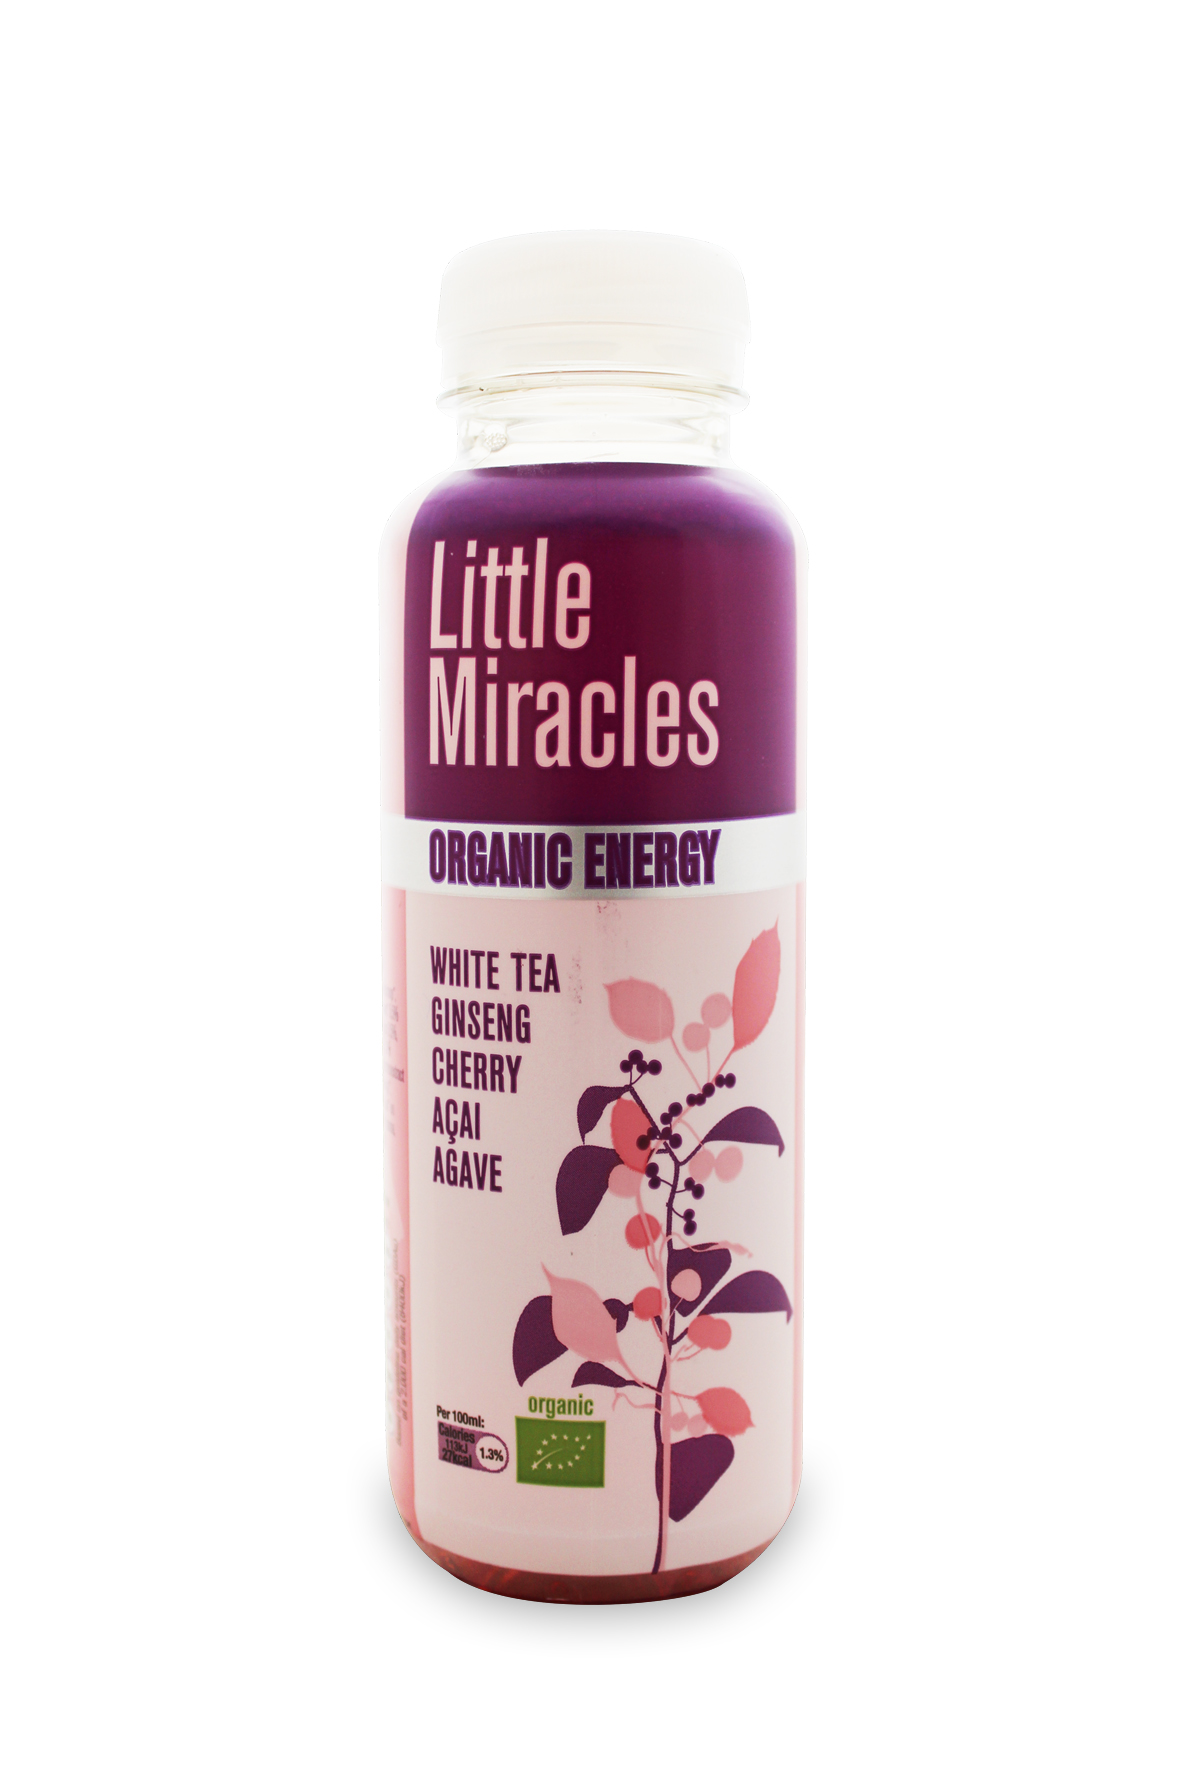 Little Miracles energy drink BIO flavored white tea, ginseng, cherries, acai